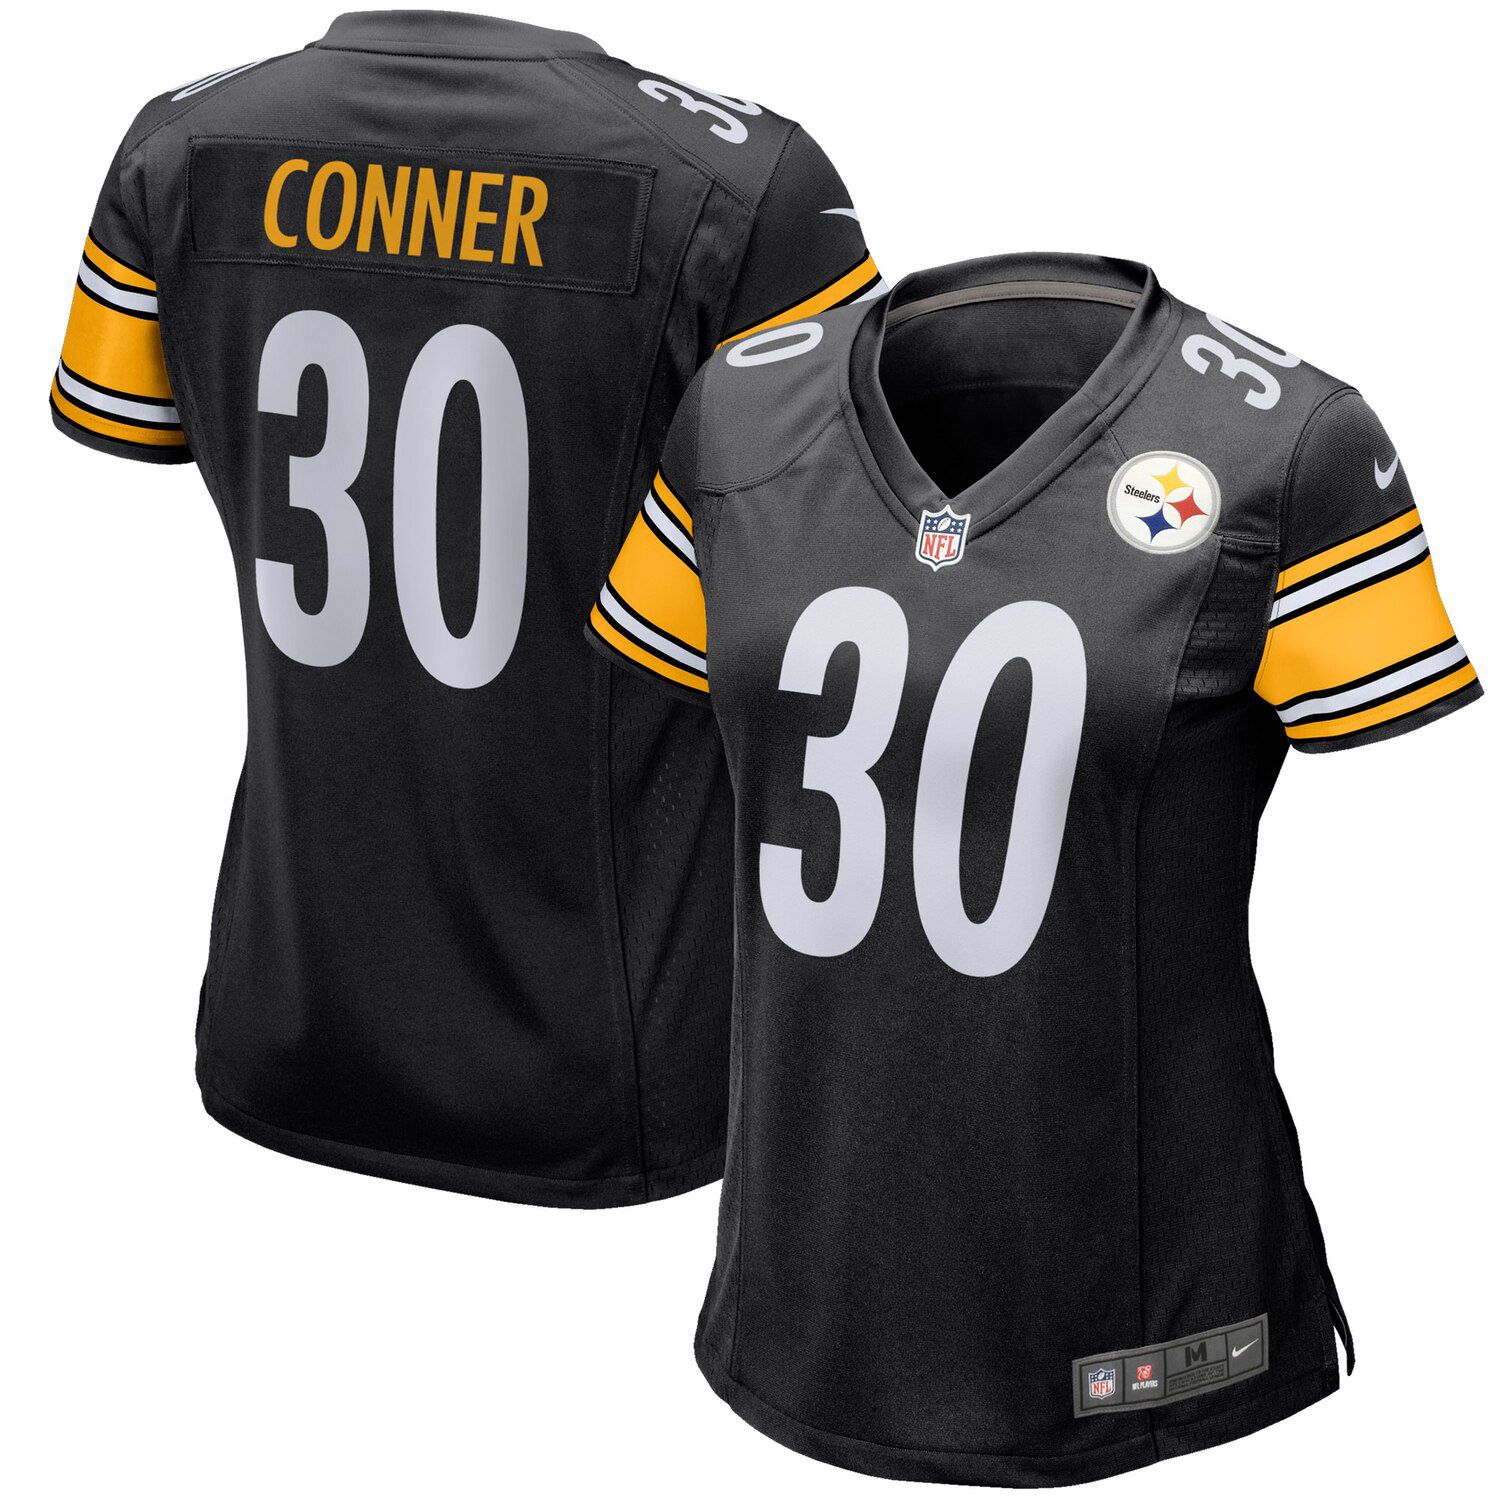 Pittsburgh Steelers Game Jersey